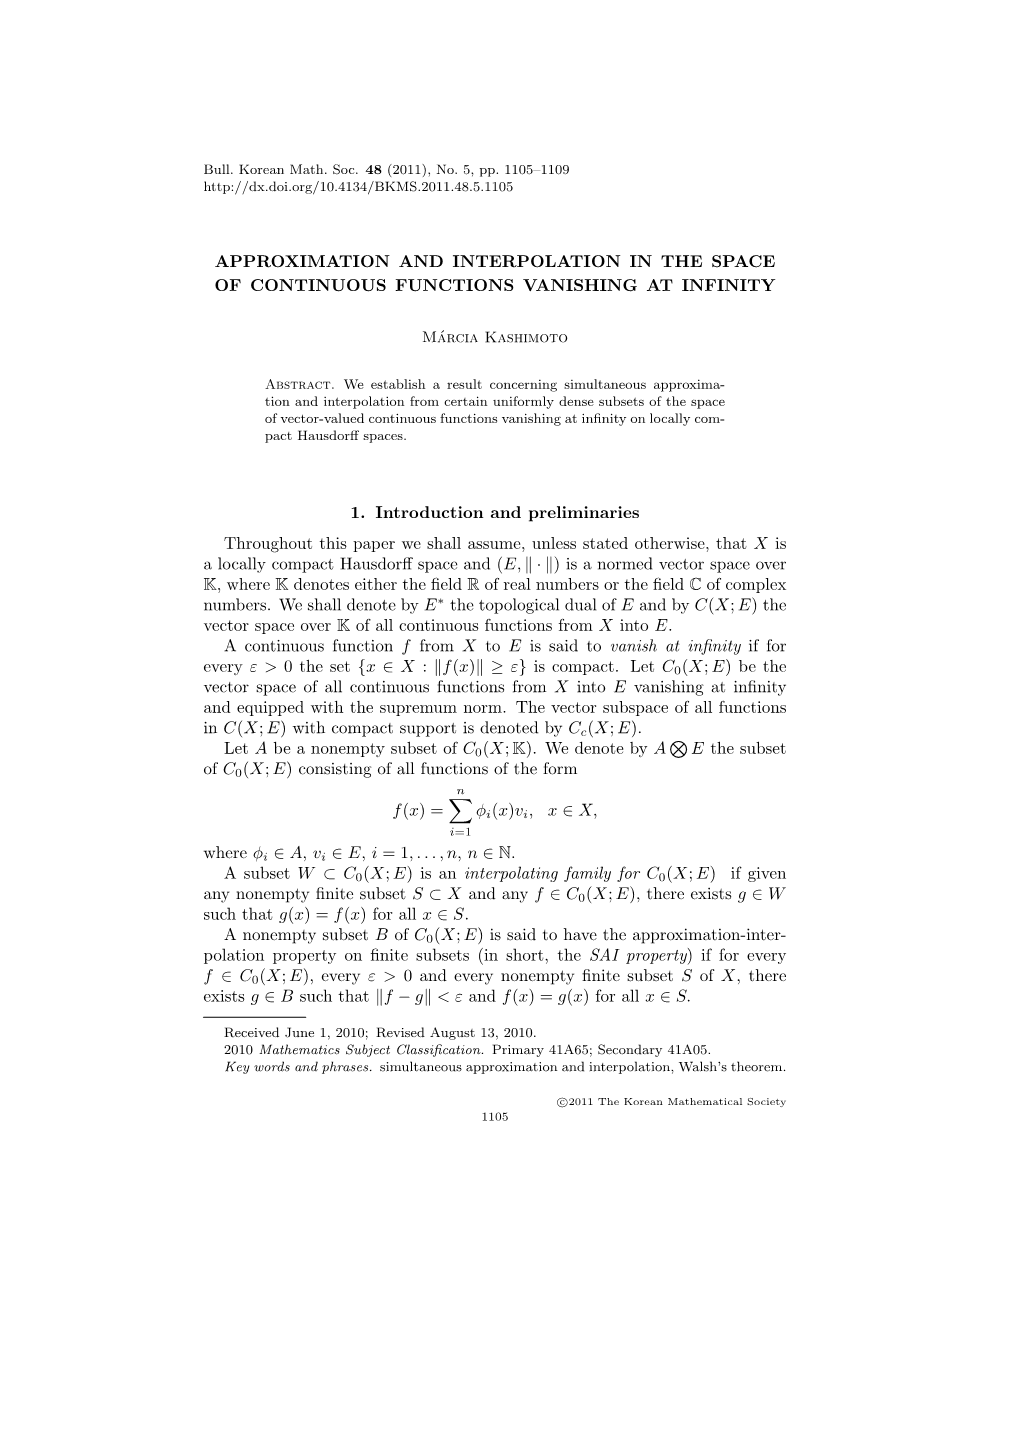 Approximation and Interpolation in the Space of Continuous Functions Vanishing at Infinity